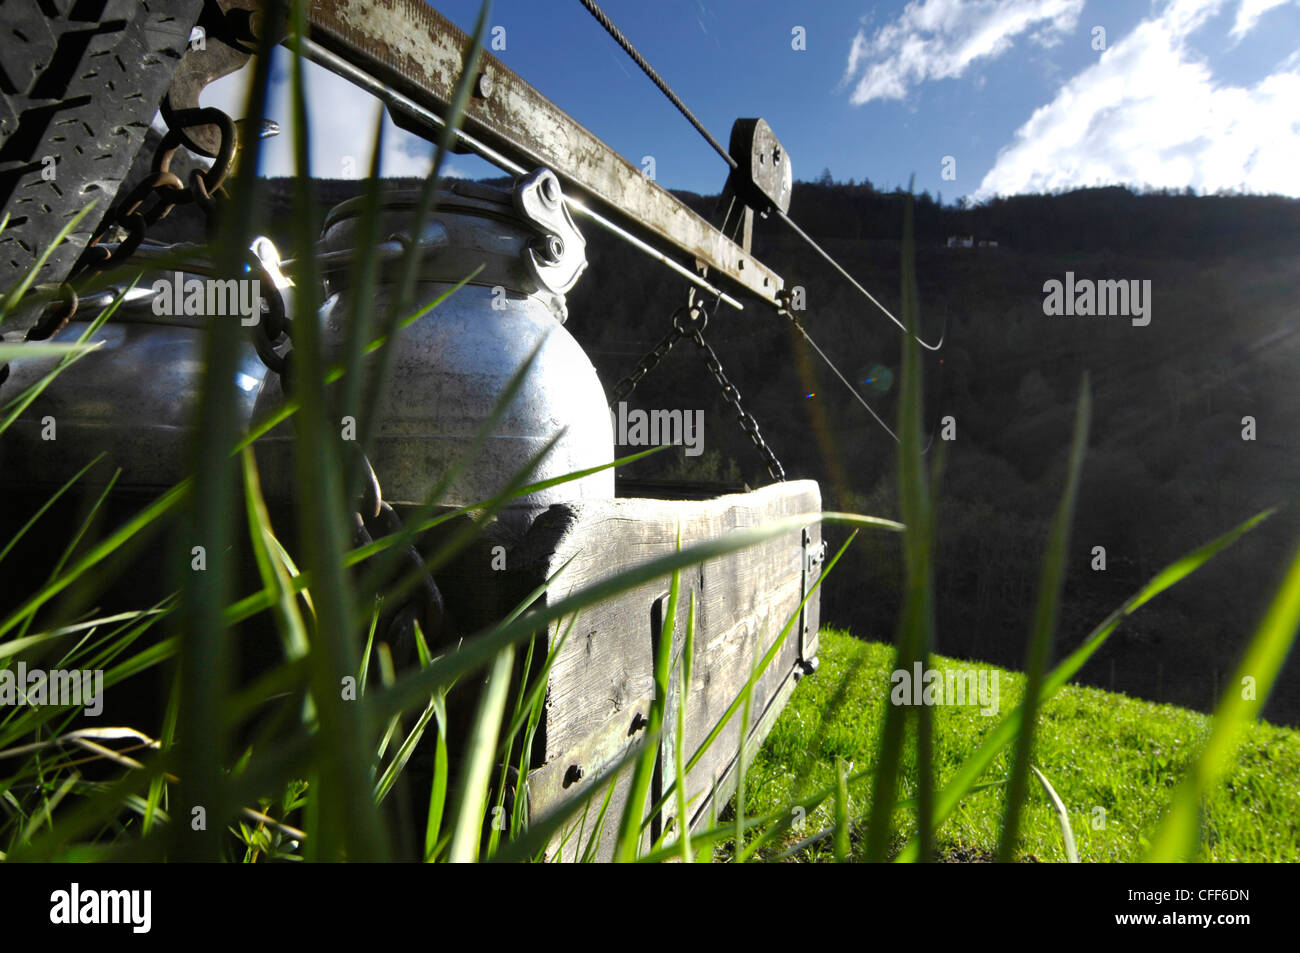 Milk cans in a cable car, Schnals valley, South Tyrol, Italy, Europe Stock Photo